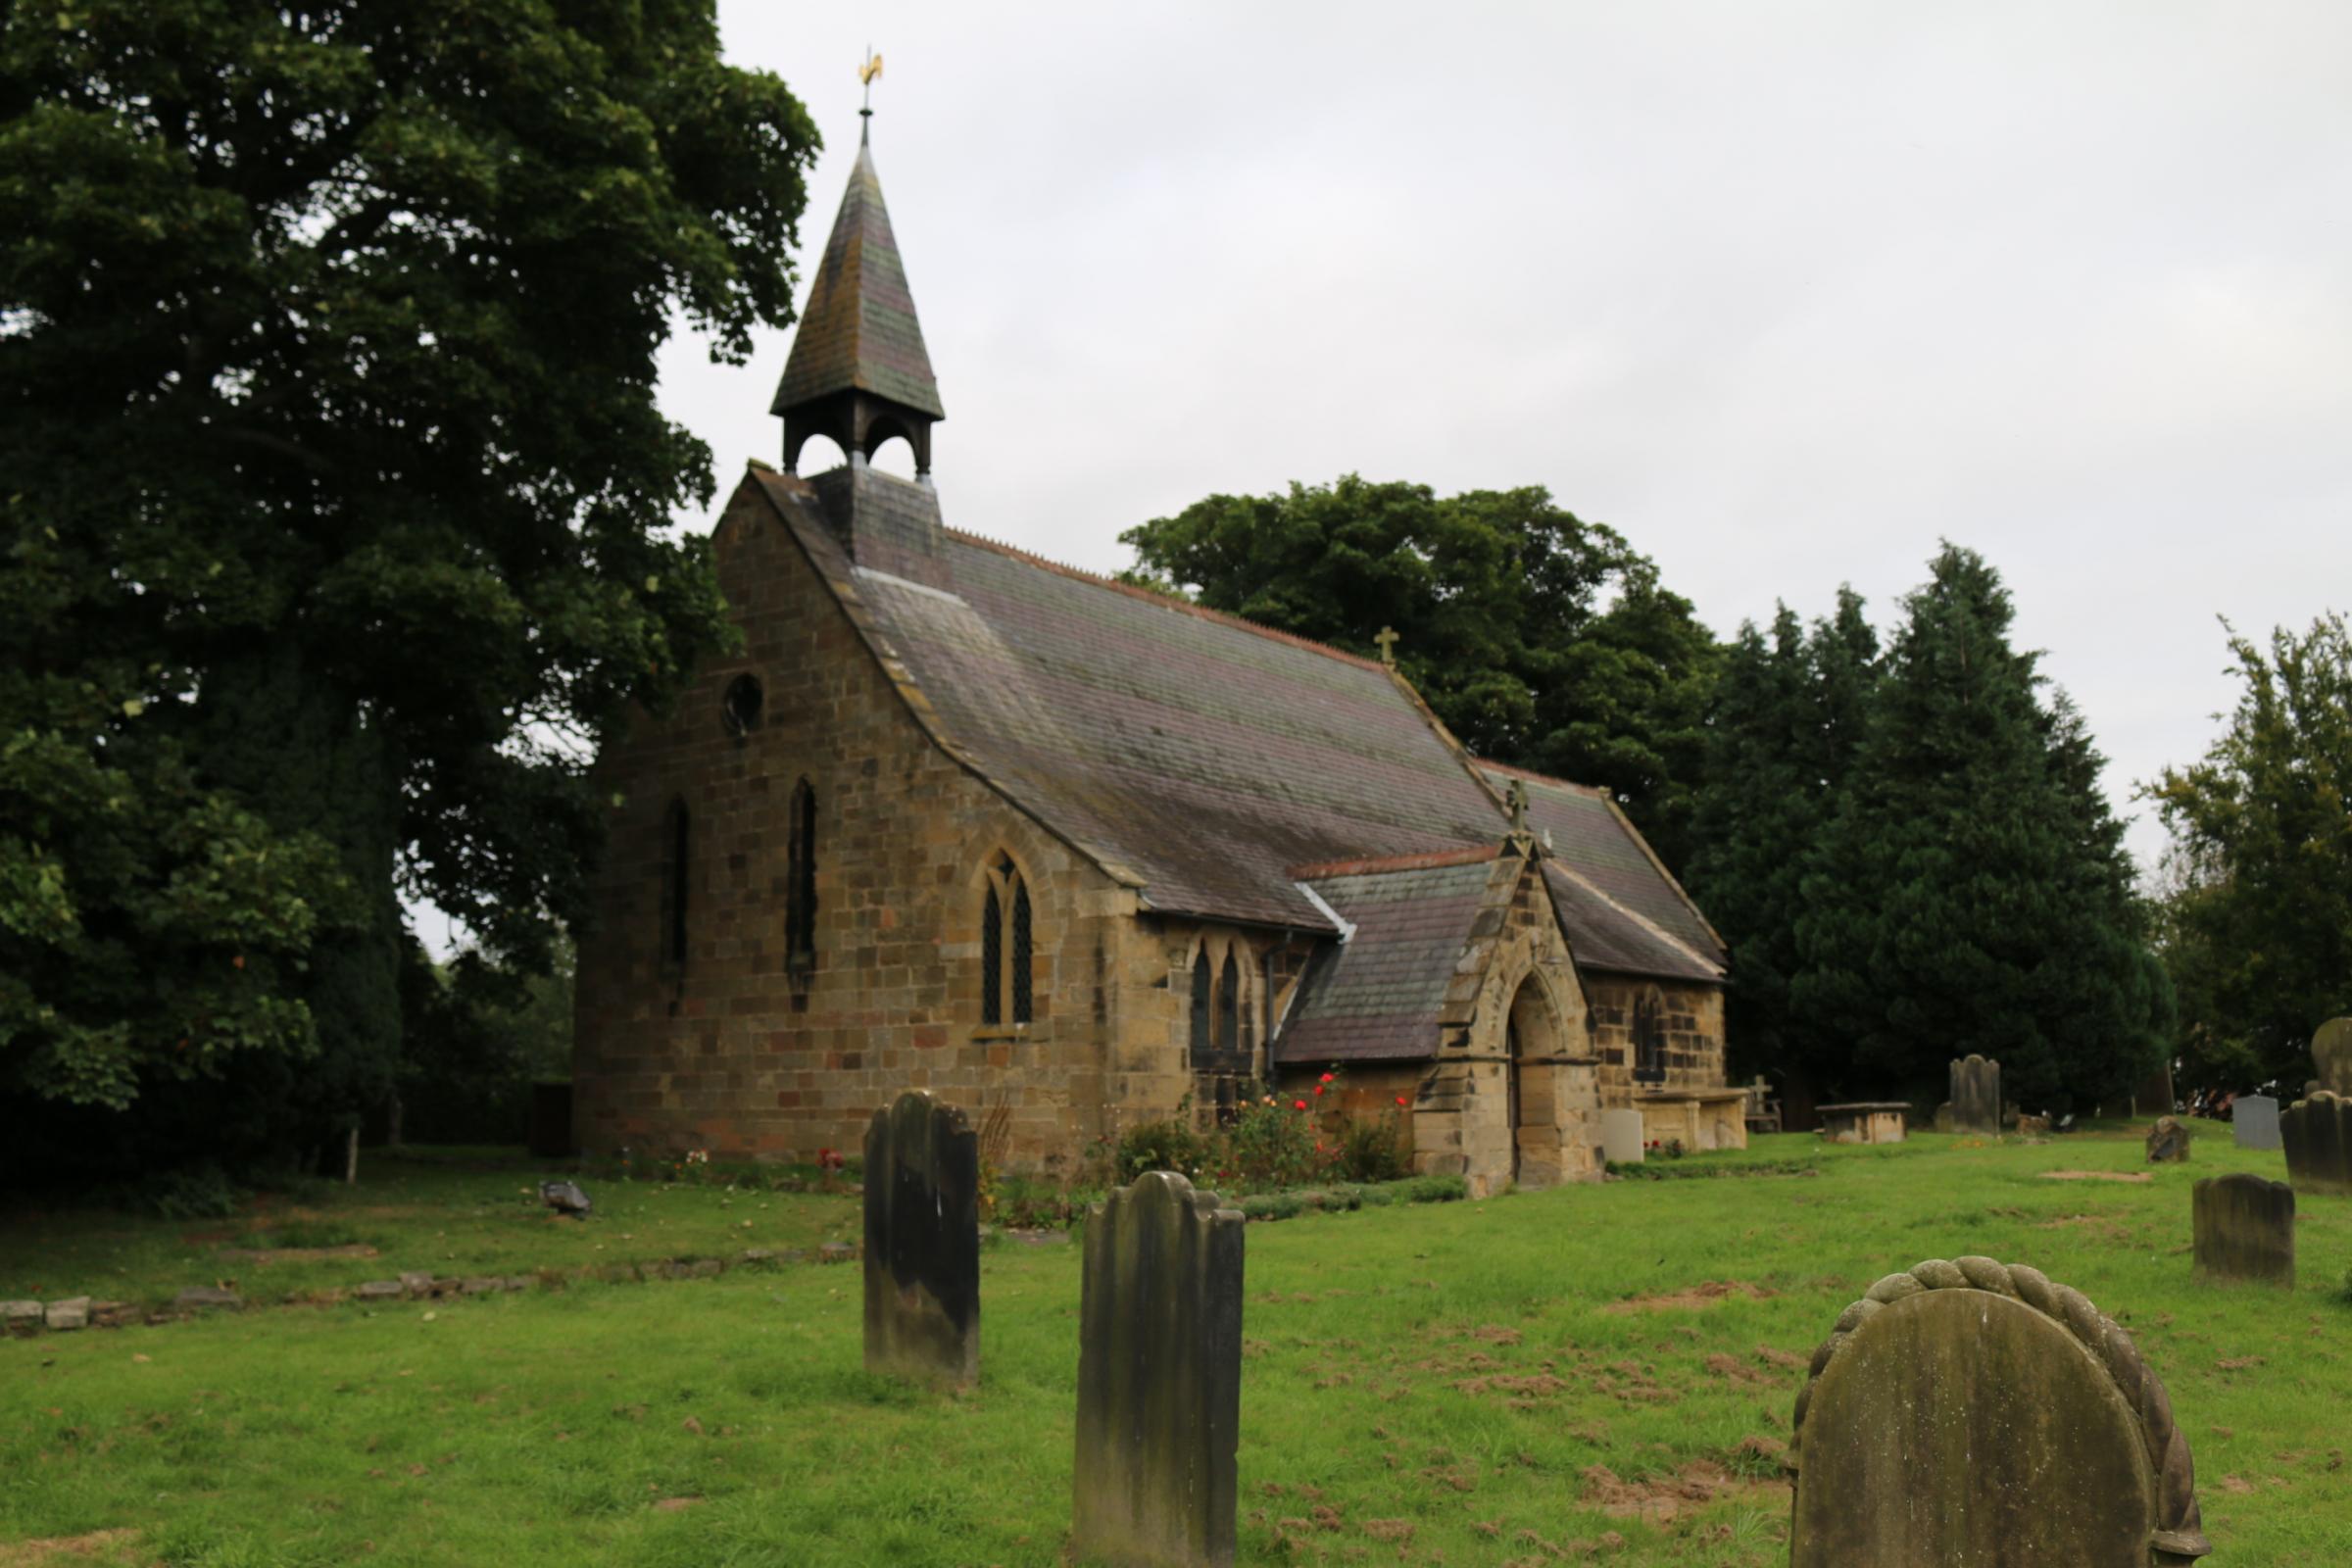 St Eloy Church at Great Smeaton, the only church dedicated to the patron saint of blacksmiths in the country